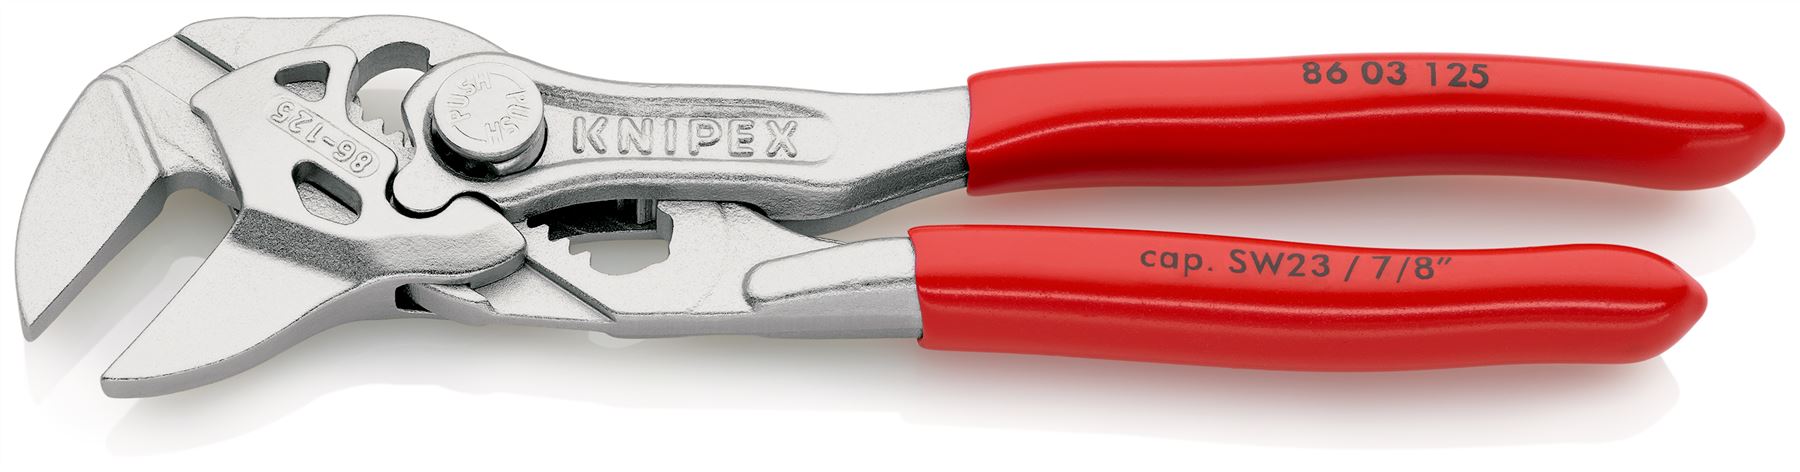 KNIPEX Pliers Wrench Slip Joint Plier 125mm Chrome Plastic Coated Handles 86 03 125 SB